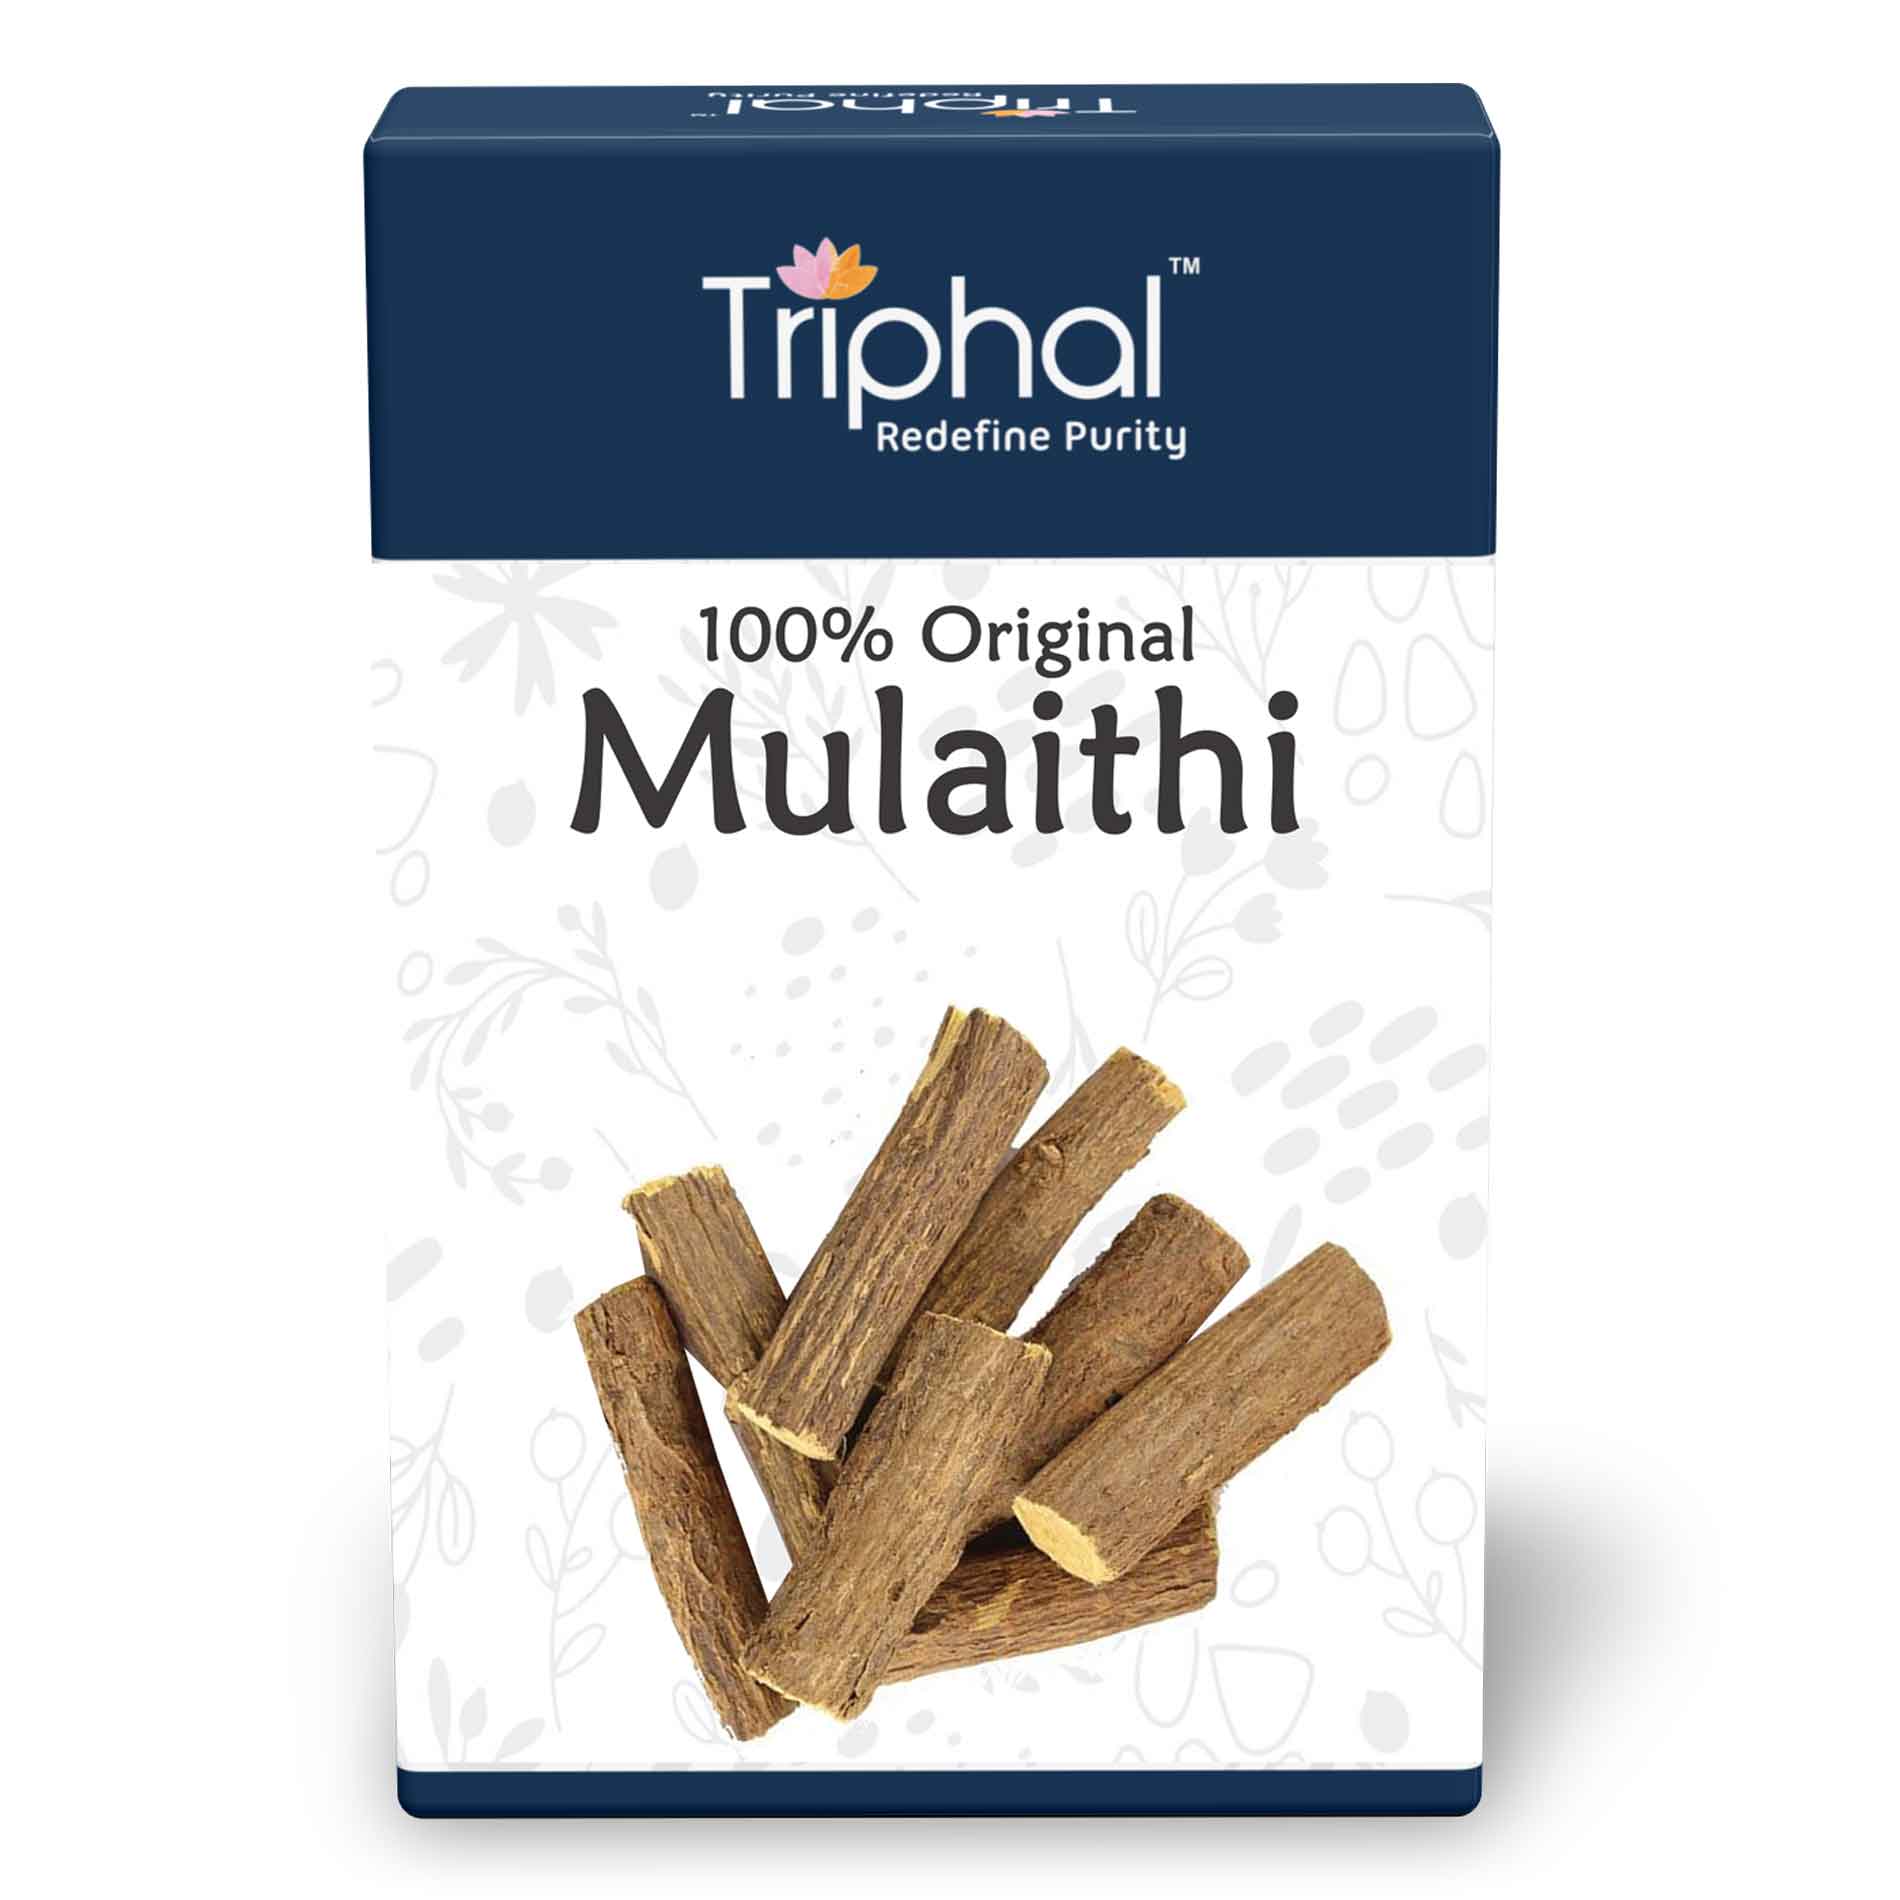 whole mulaithi roots sold by Triphal brand, showing their brown color and natural texture